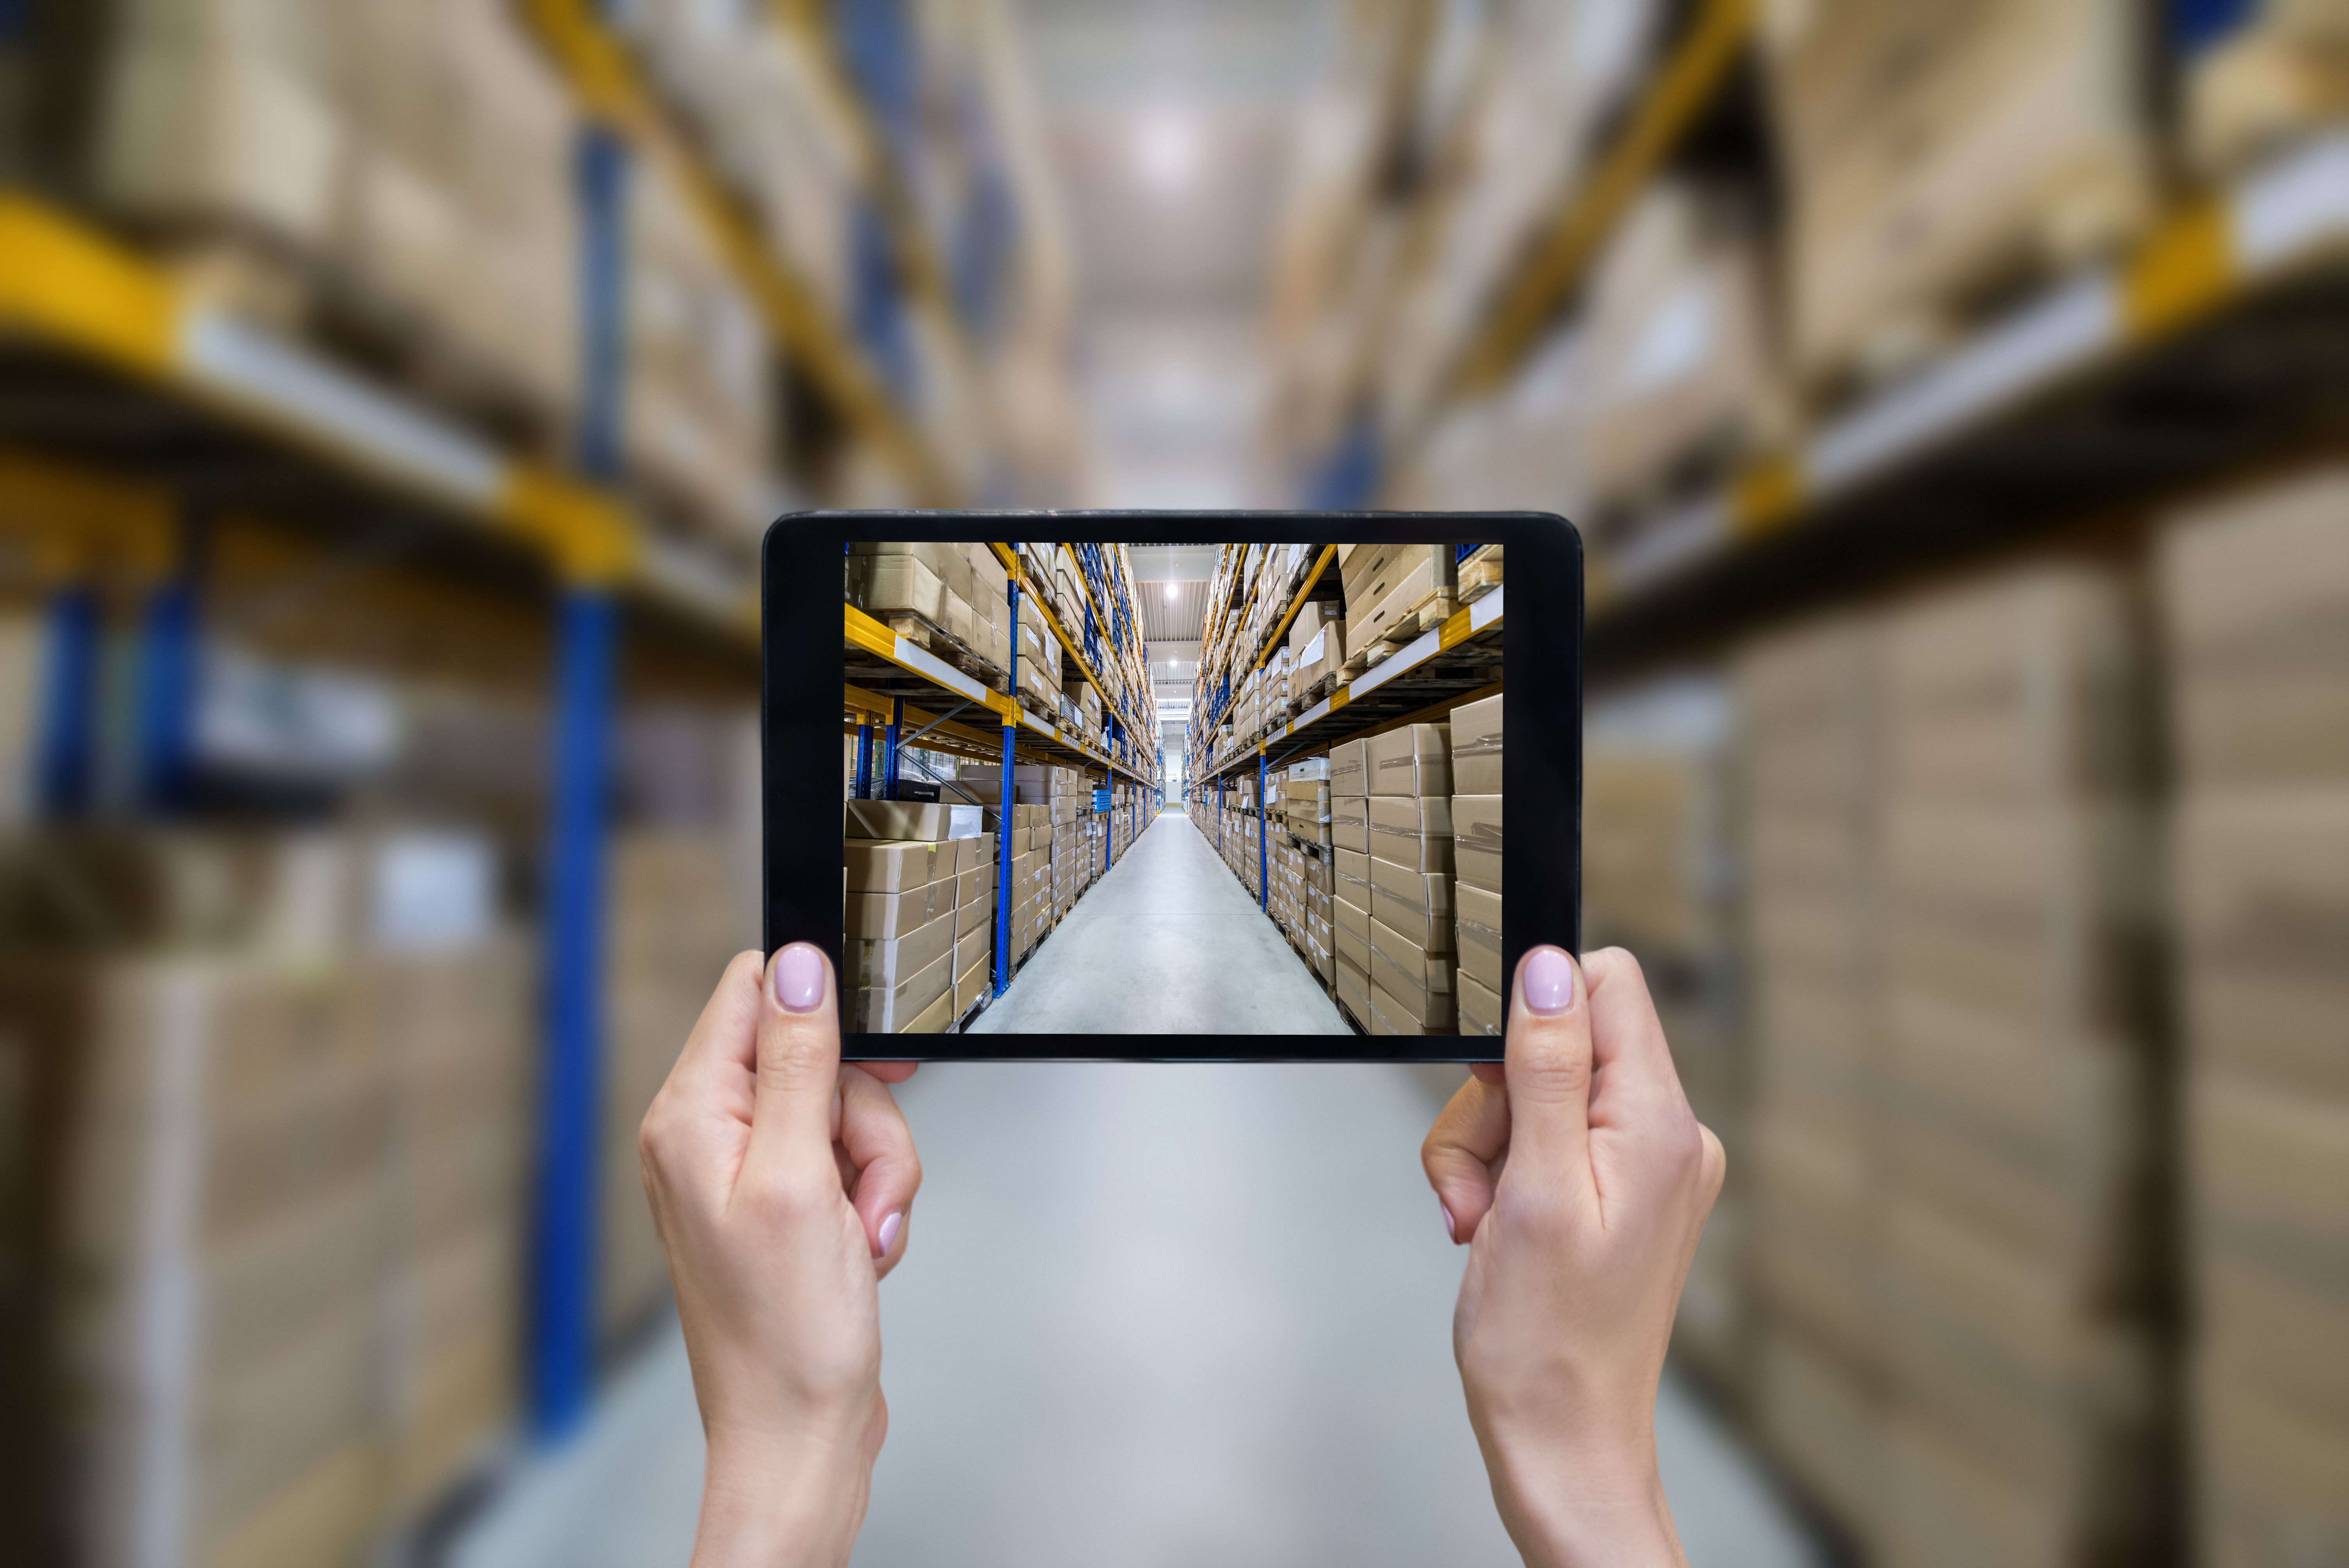 tablet taking photo of warehouse aisle with everything blurred except for the tablet screen